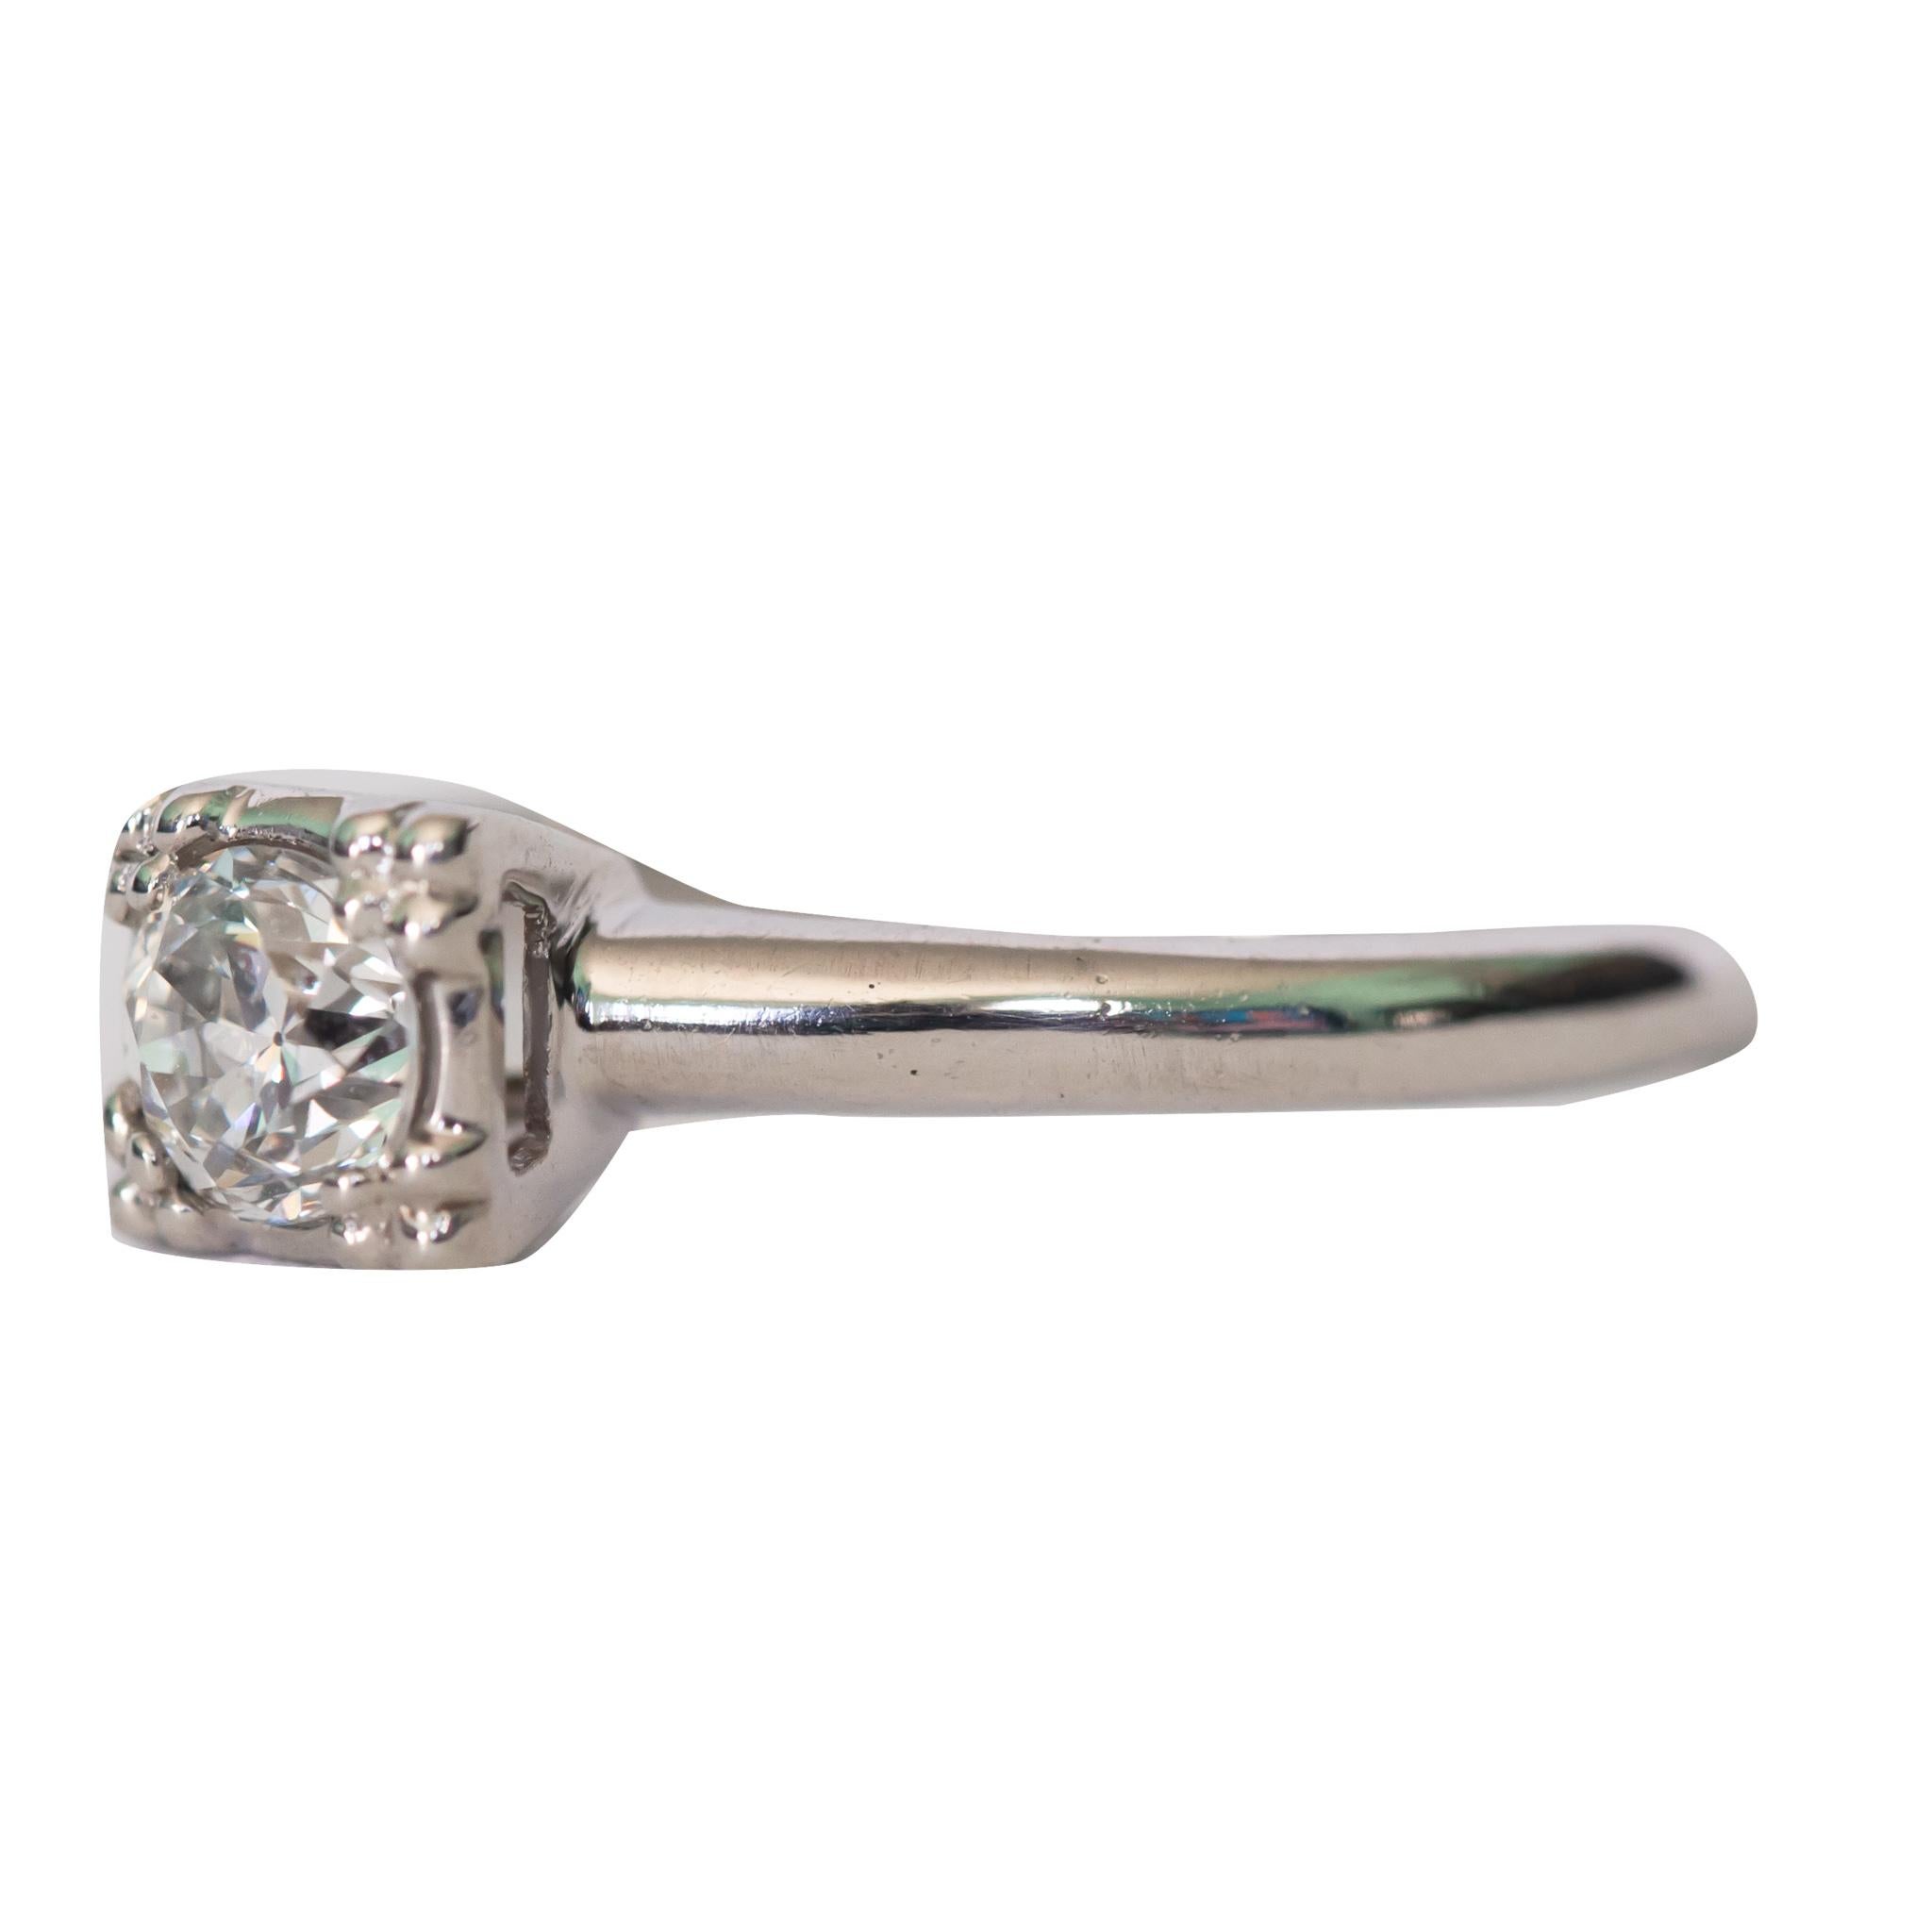 Ring Size: 6.25
Metal Type: Platinum [Hallmarked, and Tested]
Weight:  2.25 grams

Center Diamond Details:
GIA REPORT #5202058614
Weight: .36 carat
Cut: Old European Brilliant
Color: G
Clarity: SI1
Finger to Top of Stone Measurement: 5.5
Condition: 